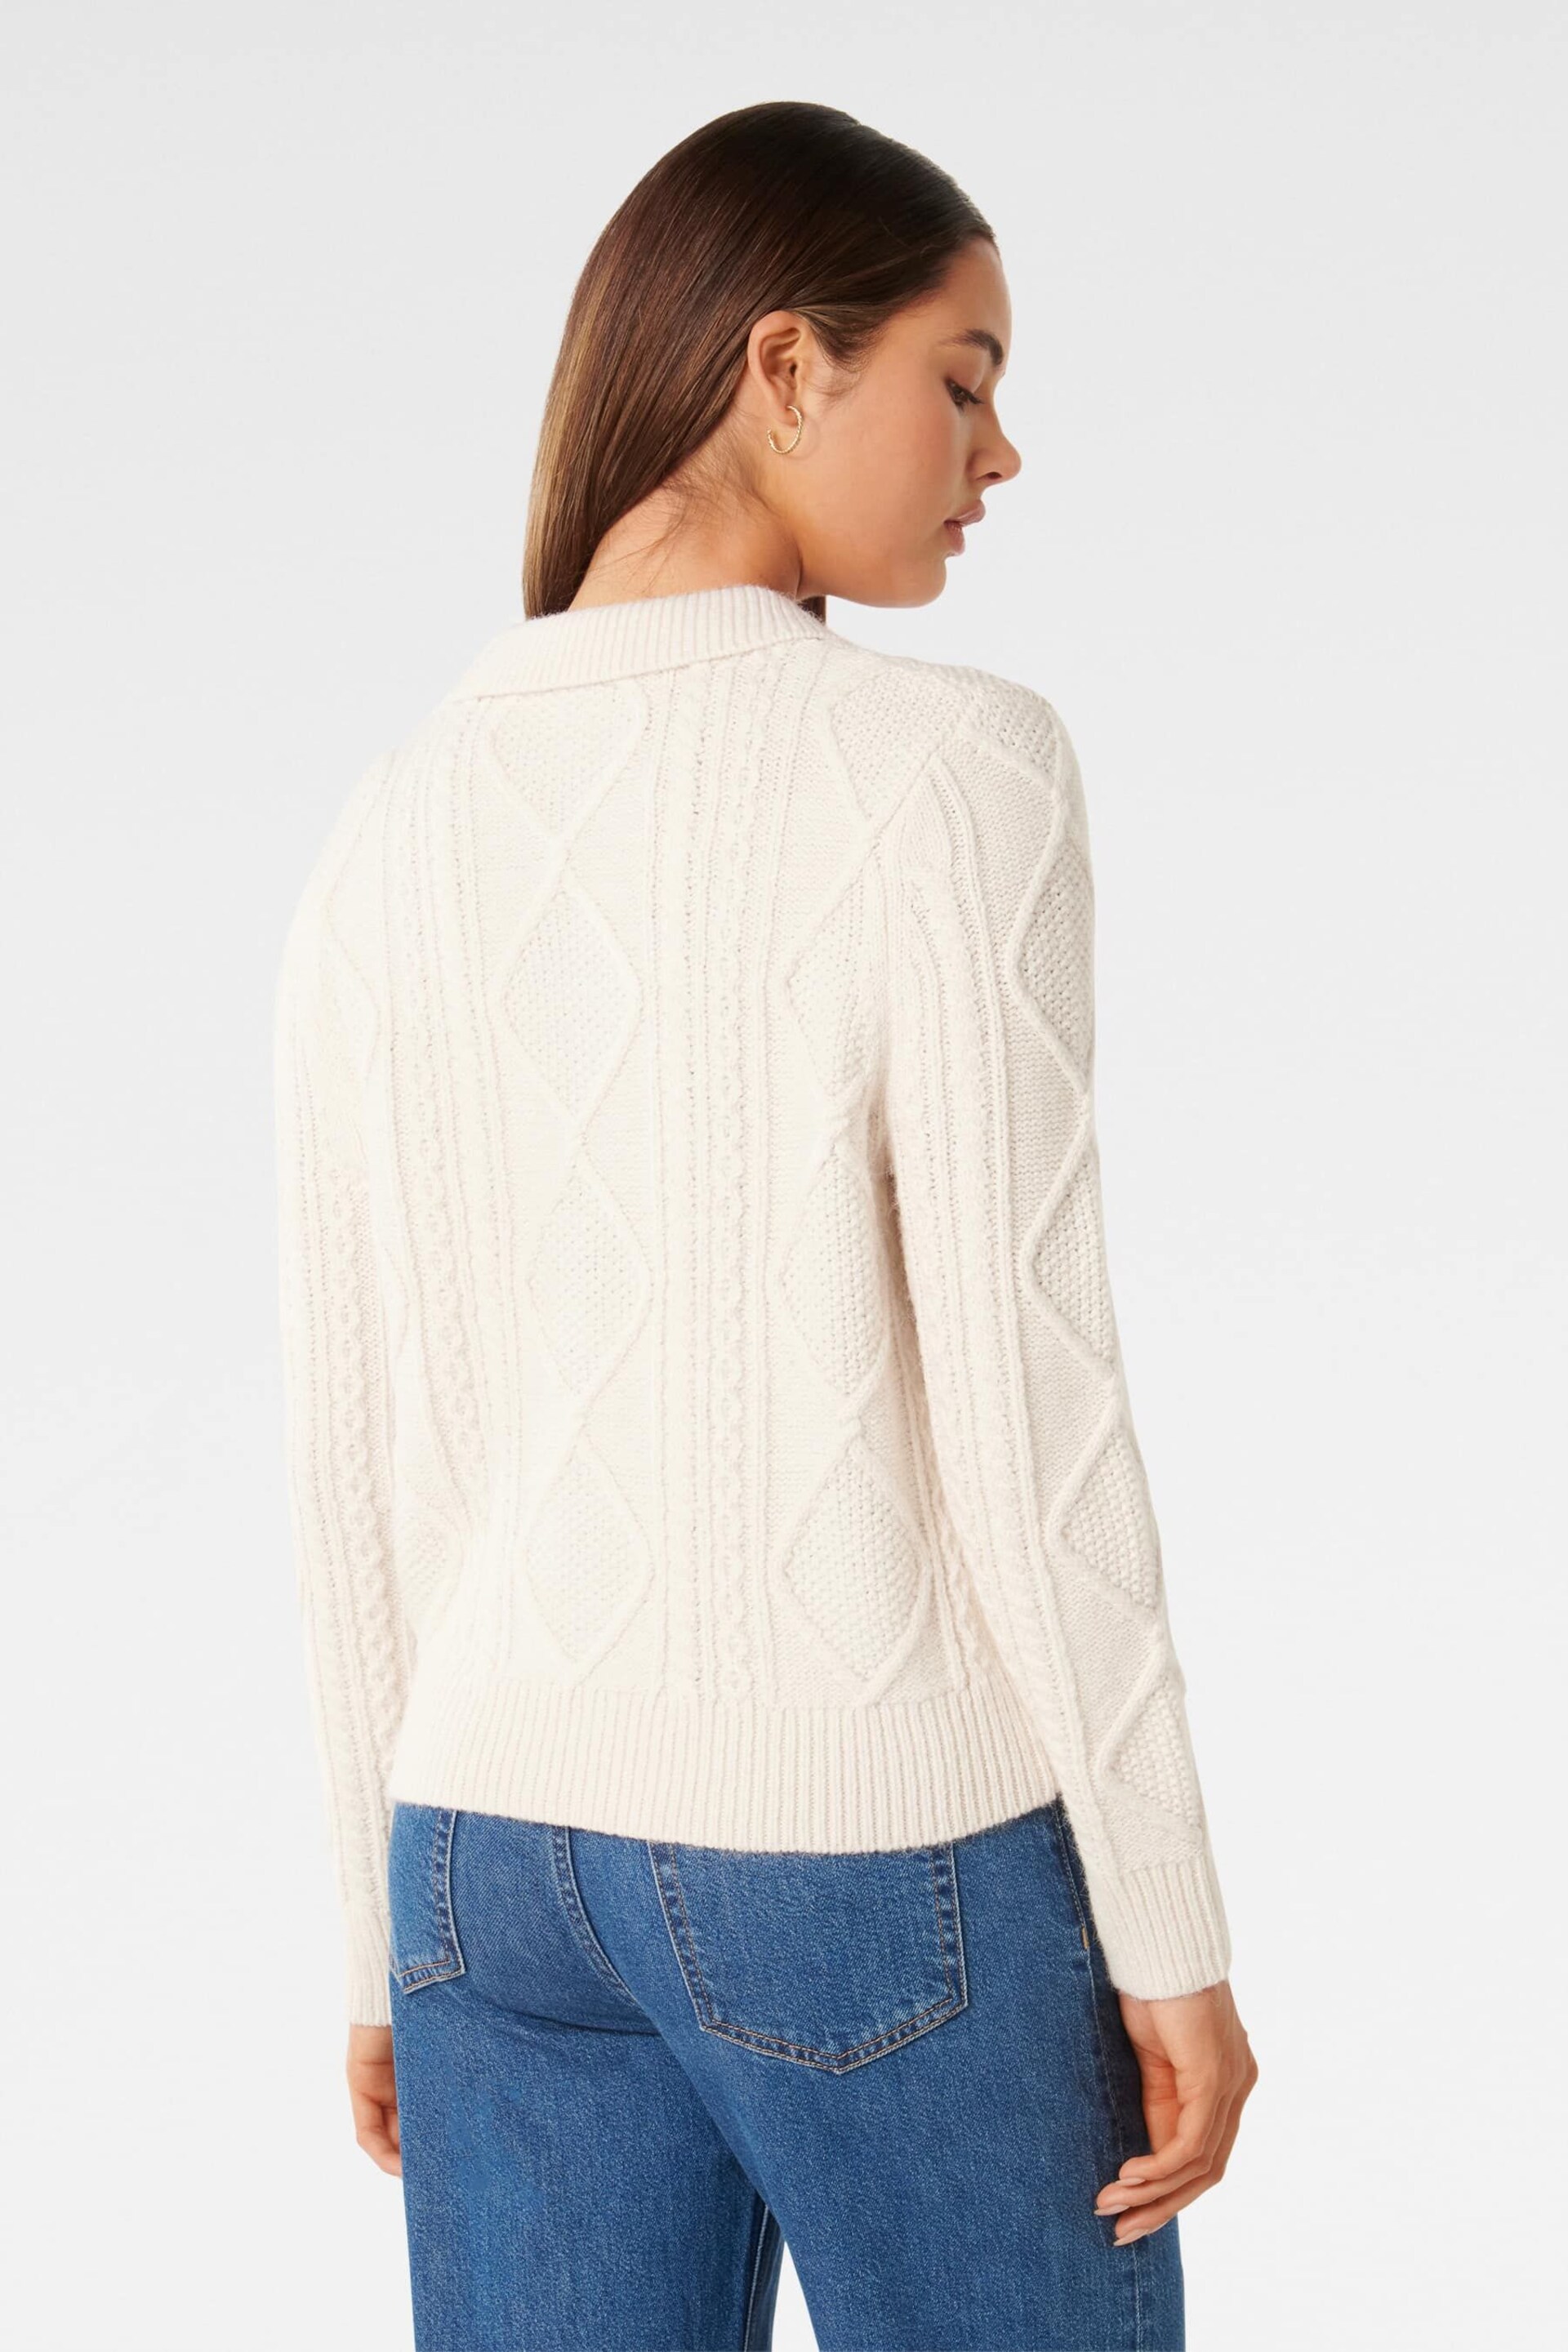 Forever New White Cassie Cable Knit Cardigan - Image 2 of 5